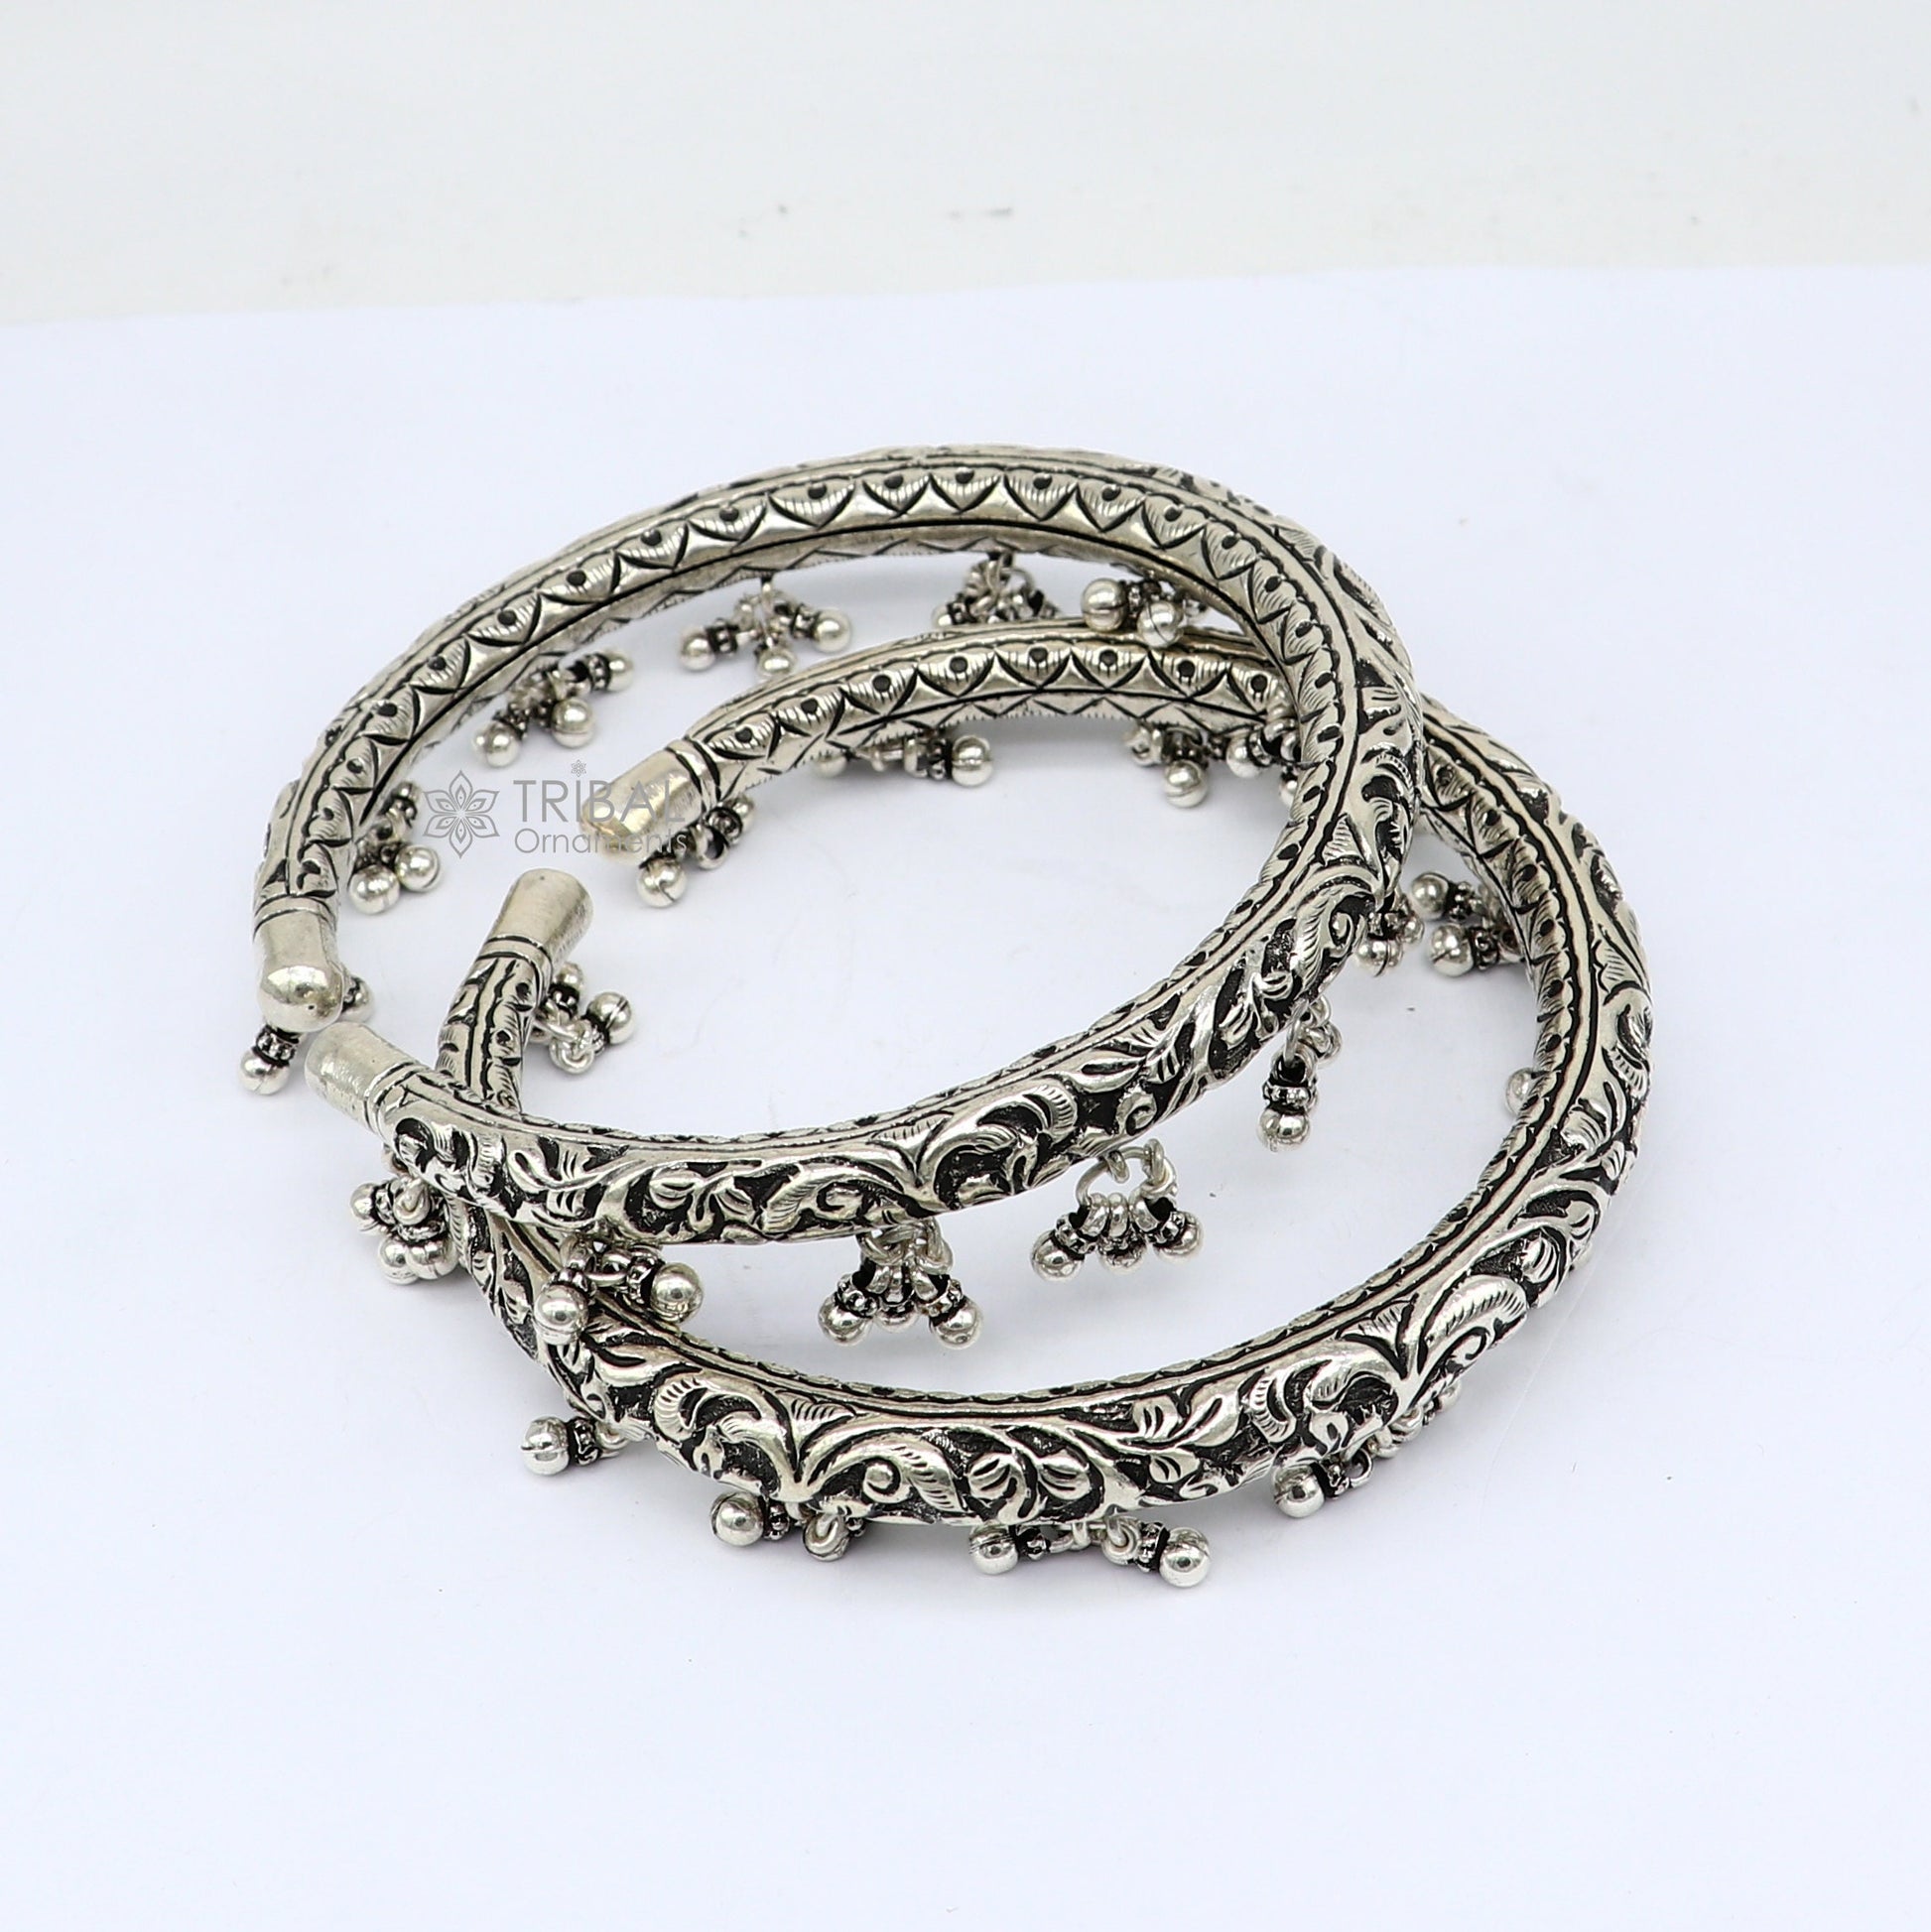 925 pure silver Vintage antique design handmade gorgeous chitai work oxidized foot kada ankle bracelet tribal ethnic silver jewelry nsfk109 - TRIBAL ORNAMENTS